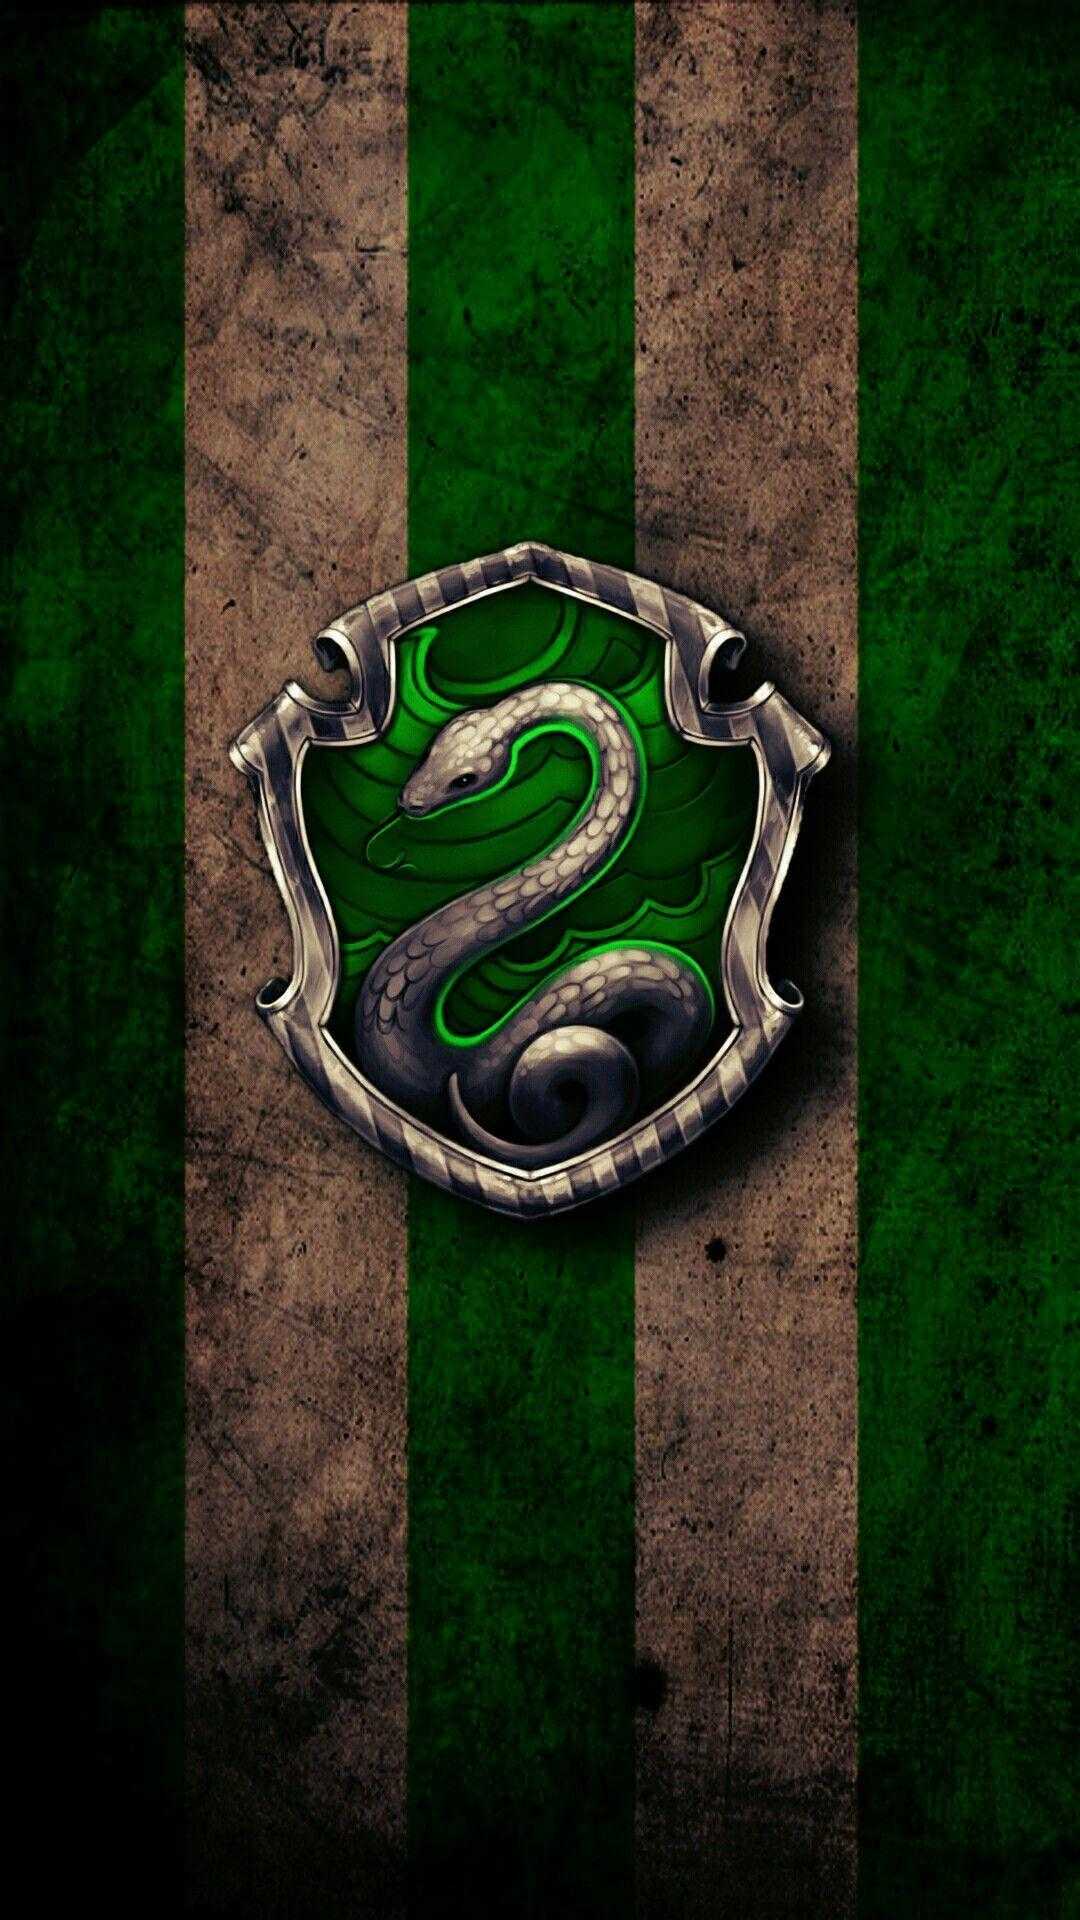 Harry Potter Slytherin Wallpaper iPhone with high-resolution 1080x1920 pixel. You can use this wallpaper for your iPhone 5, 6, 7, 8, X, XS, XR backgrounds, Mobile Screensaver, or iPad Lock Screen - Slytherin